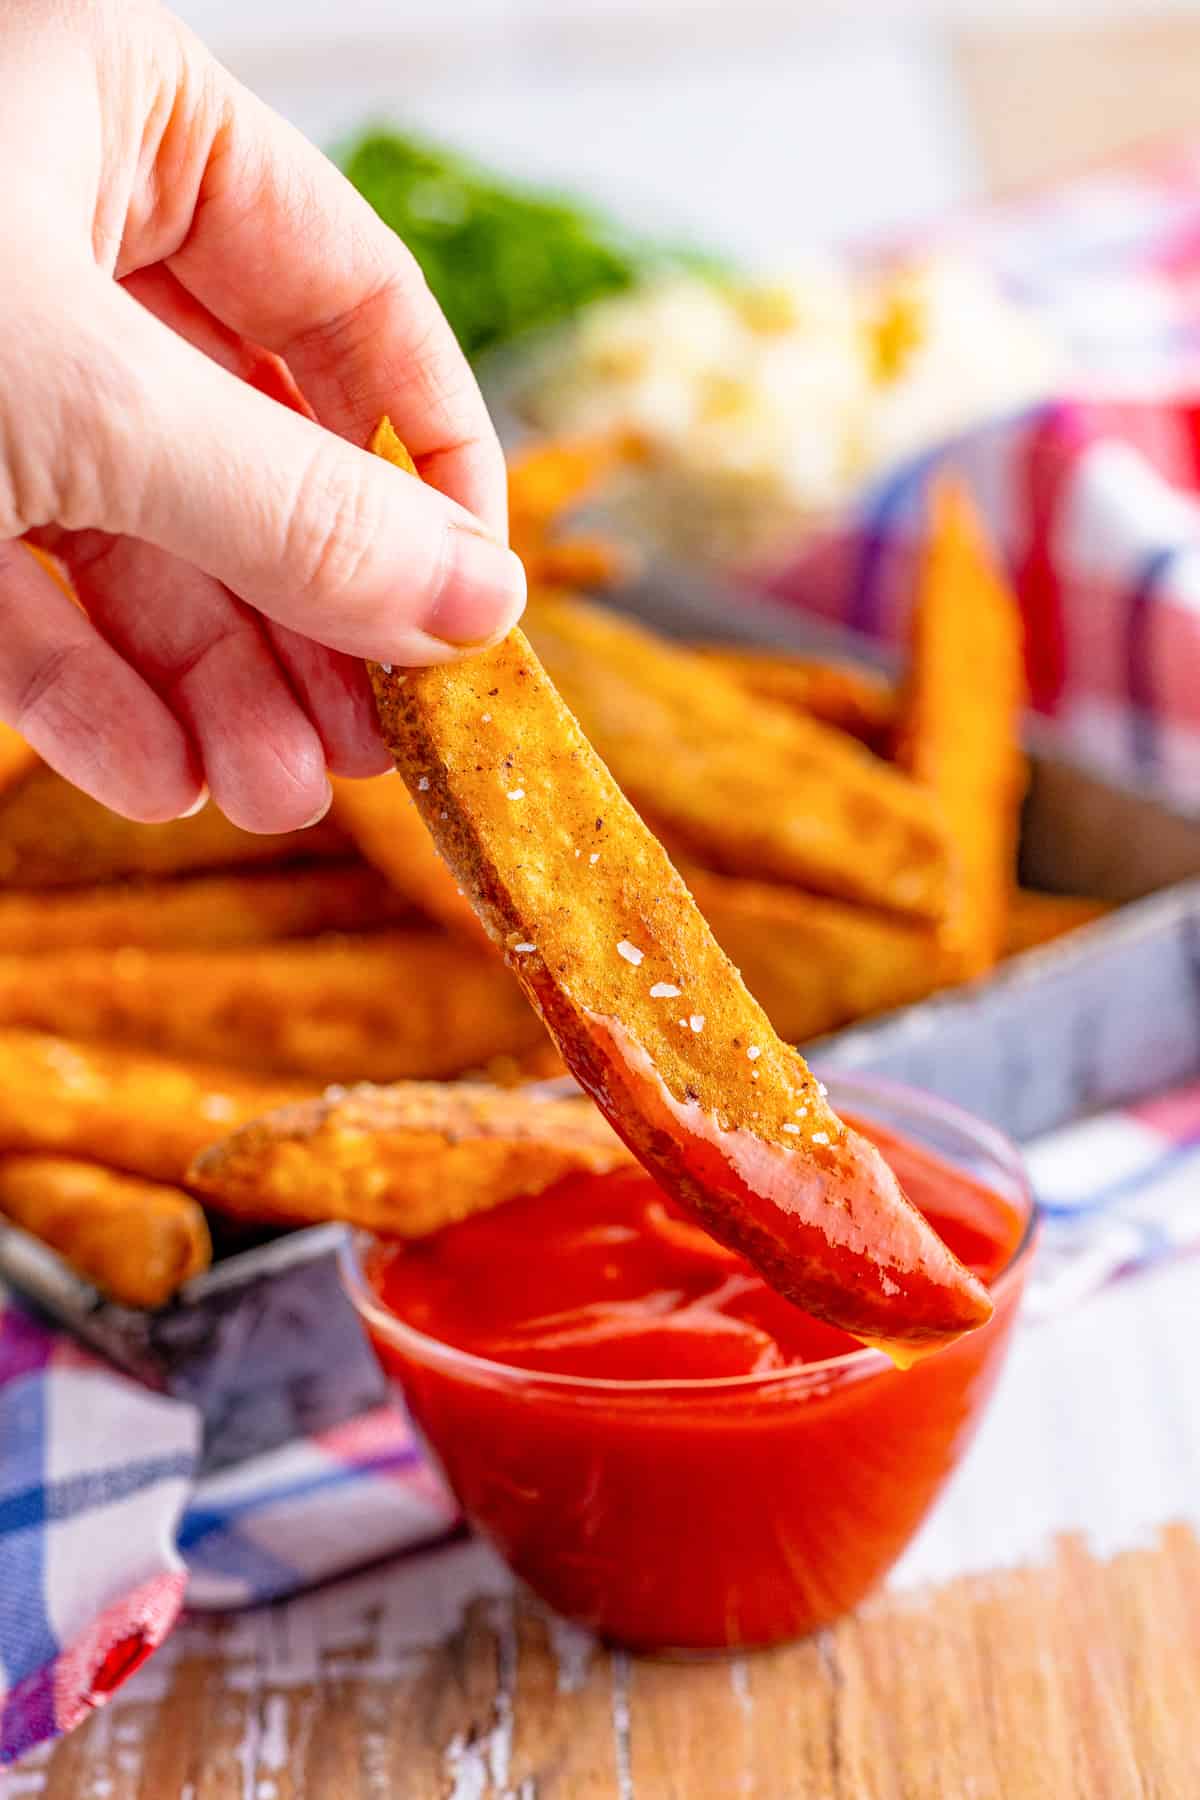 Hand holding up one Potato Wedge dipped in ketchup.